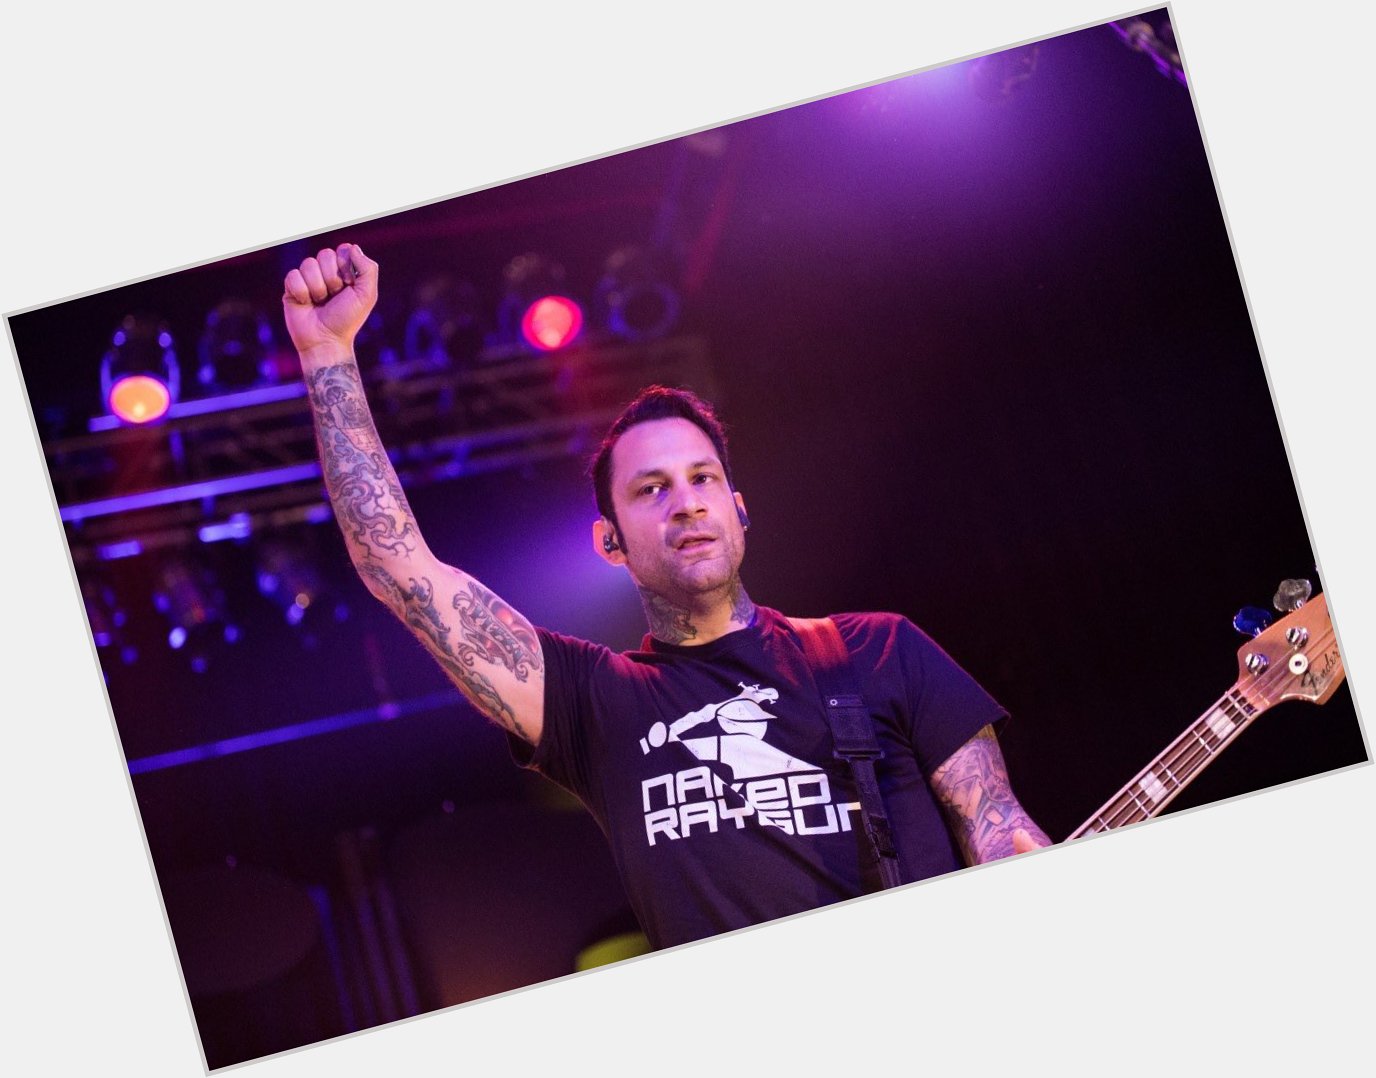 I d like to wish a happy 44th birthday to Joe Principe, bassist for Rise Against!  